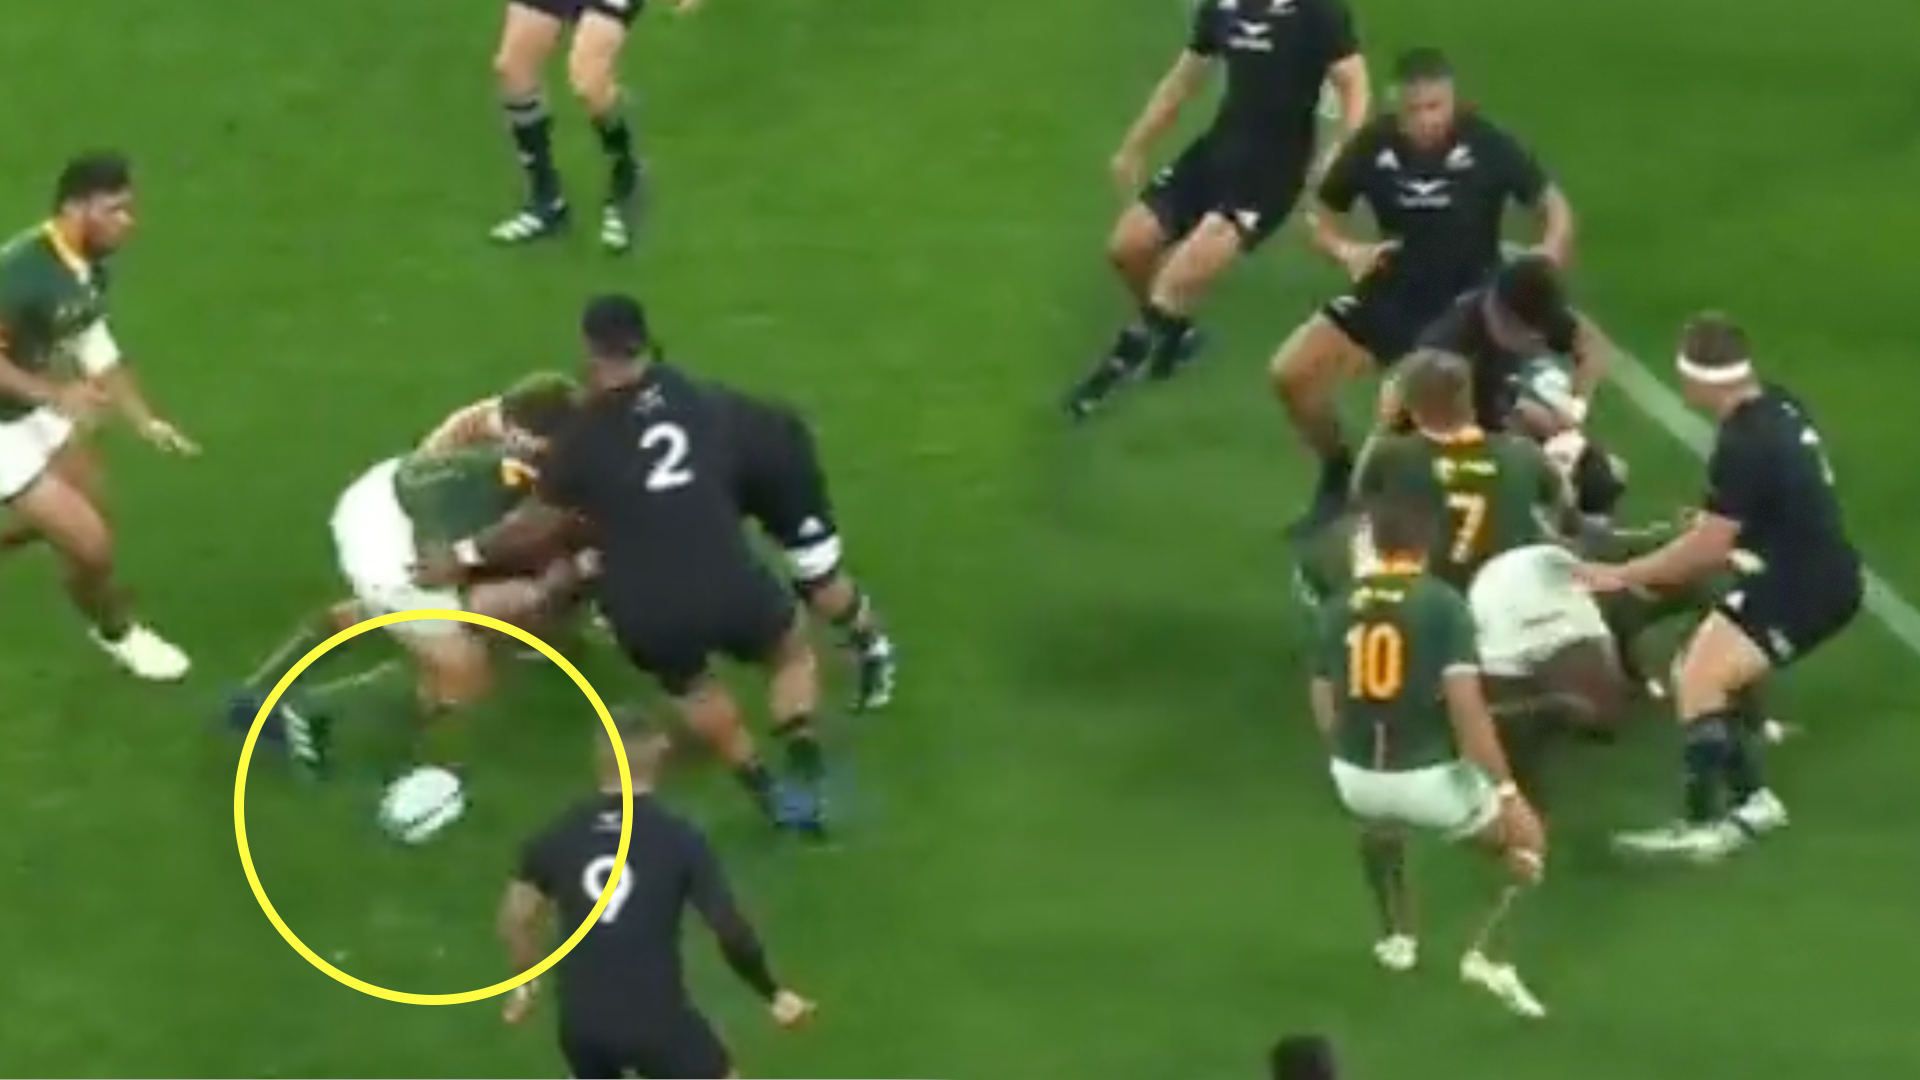 The video everyone must see before writing off the All Blacks